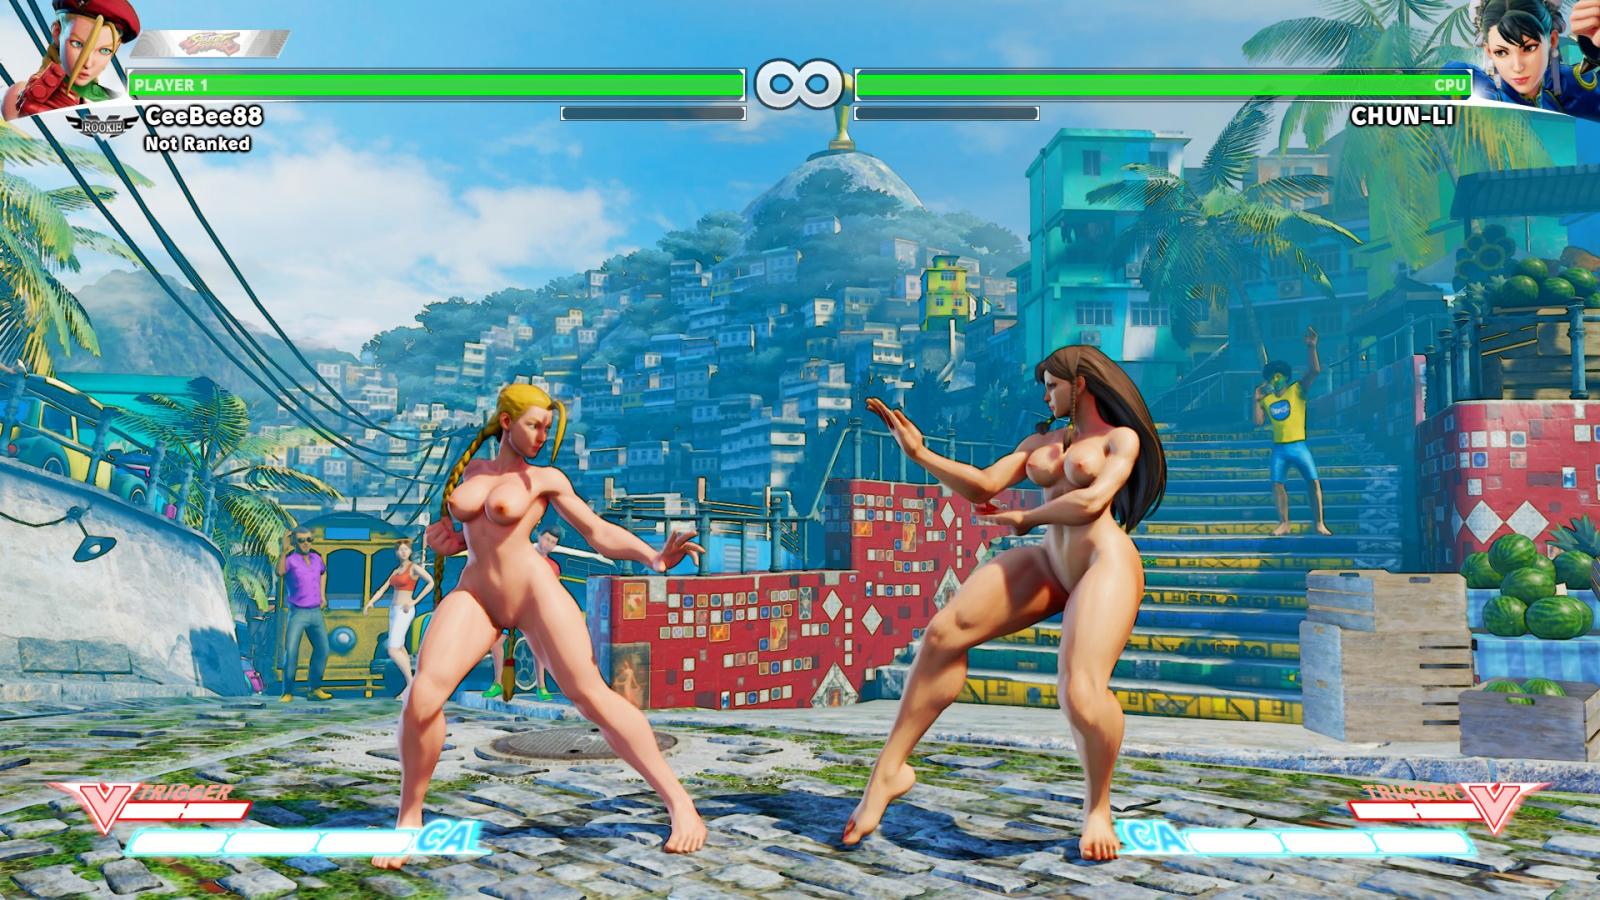 Nude mod for Cammy is available, however this one just uses Chun Li's ...